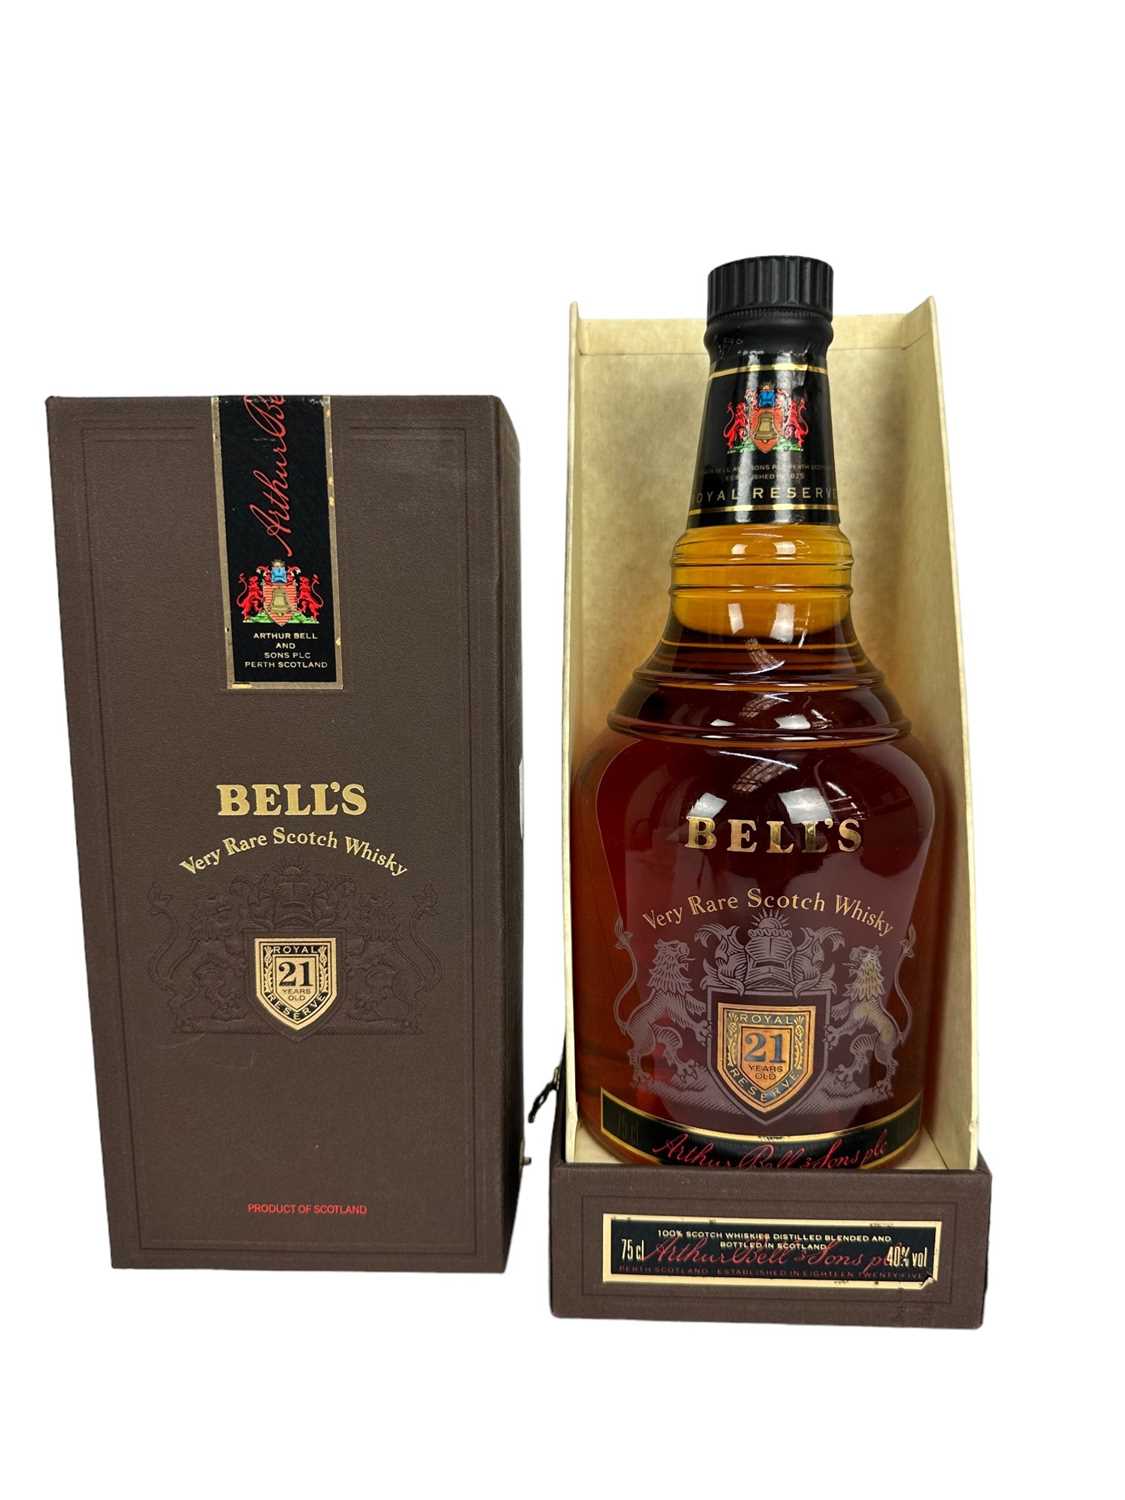 Lot 43 - Whisky - one bottle, Bell's Very Rare Scotch Whisky, 21 years old, 40%, 75cl., in presentation case